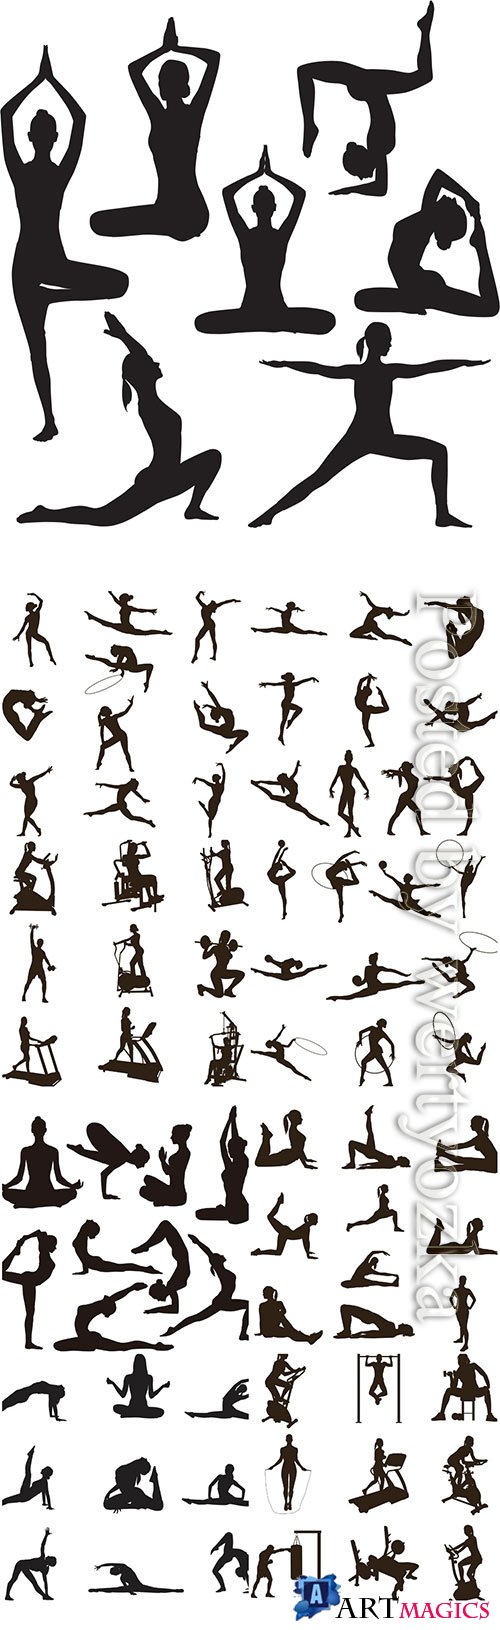 Silhouettes of women go in for sports, fitness, yoga